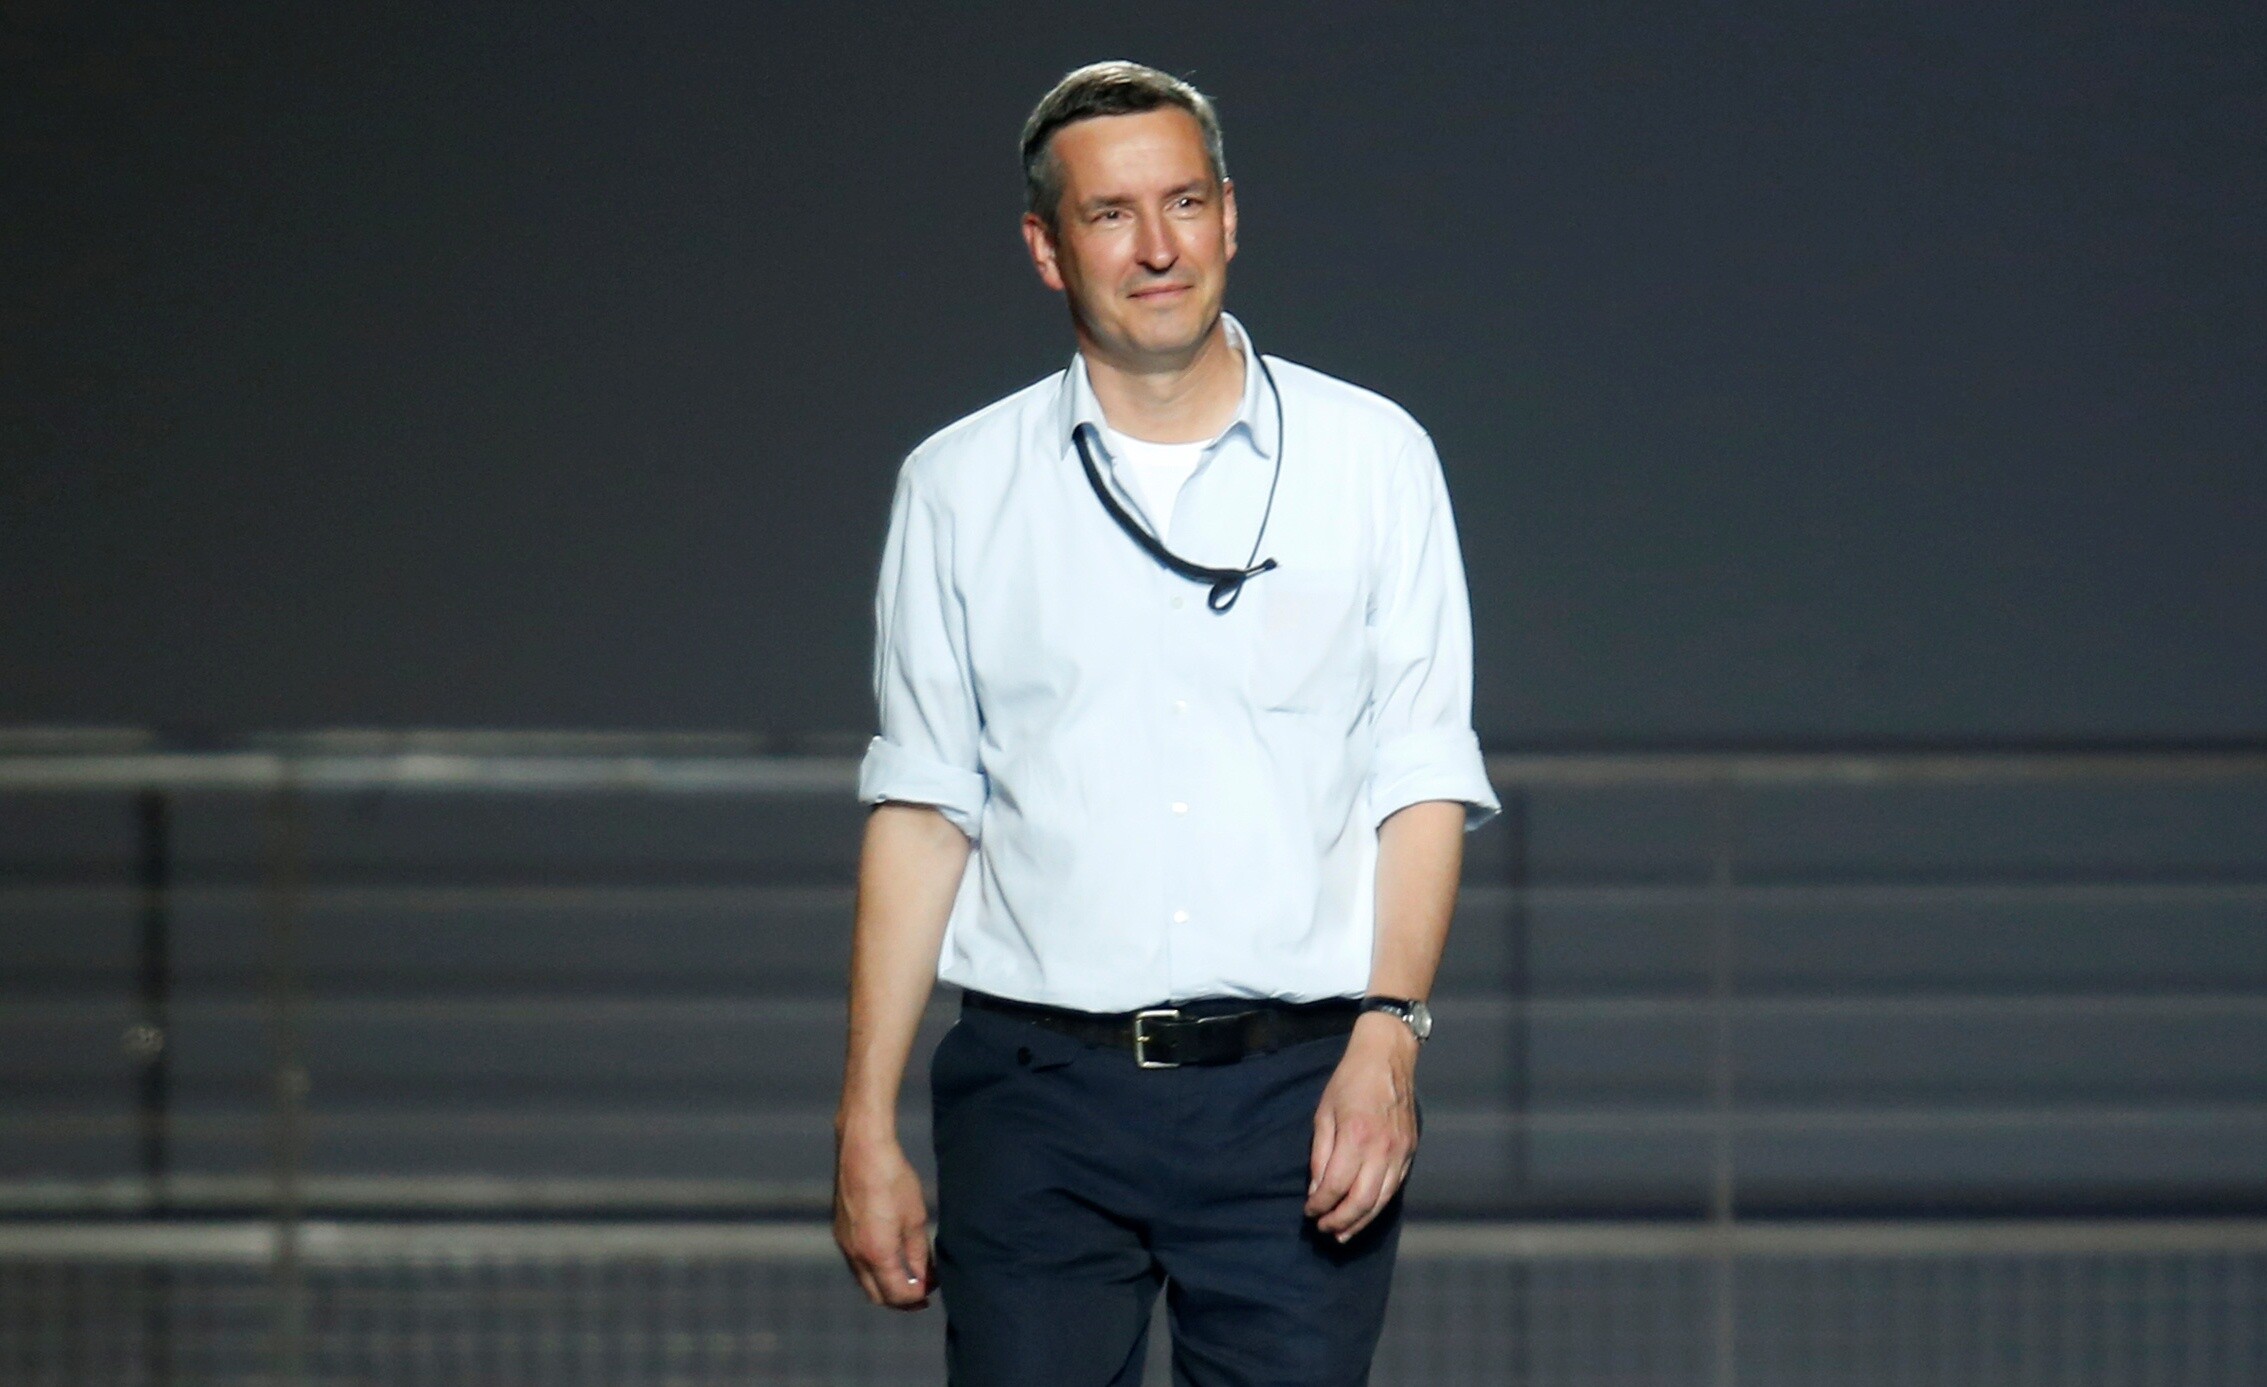 Dries Van Noten: One of Belgium's top fashion designers, Culture Award from The Province of Antwerp for his contribution to Culture. 2270x1390 HD Wallpaper.